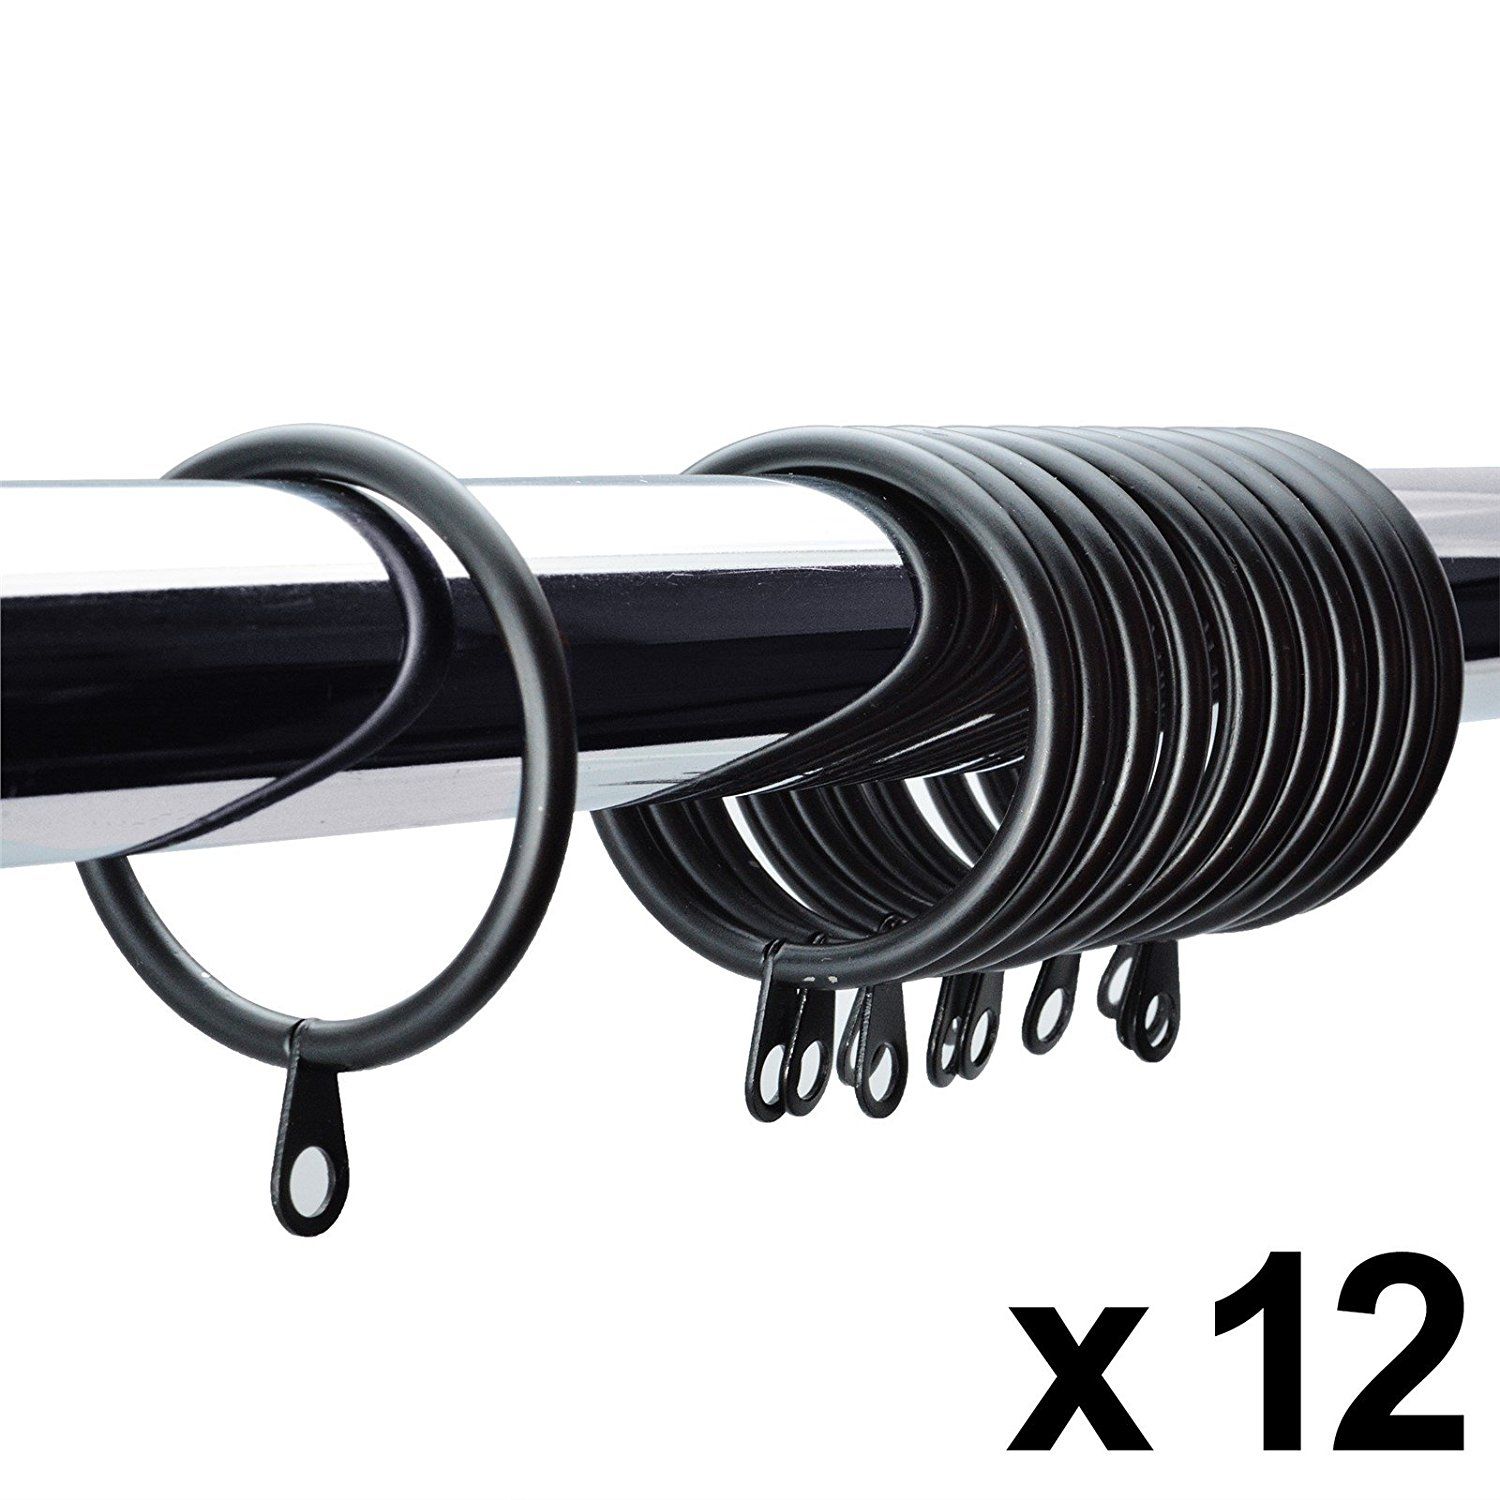 12 X Black Metal Curtain Rings Pole Rod Voile Net Curtains Rings Throughout Black Curtain Rings (View 25 of 25)